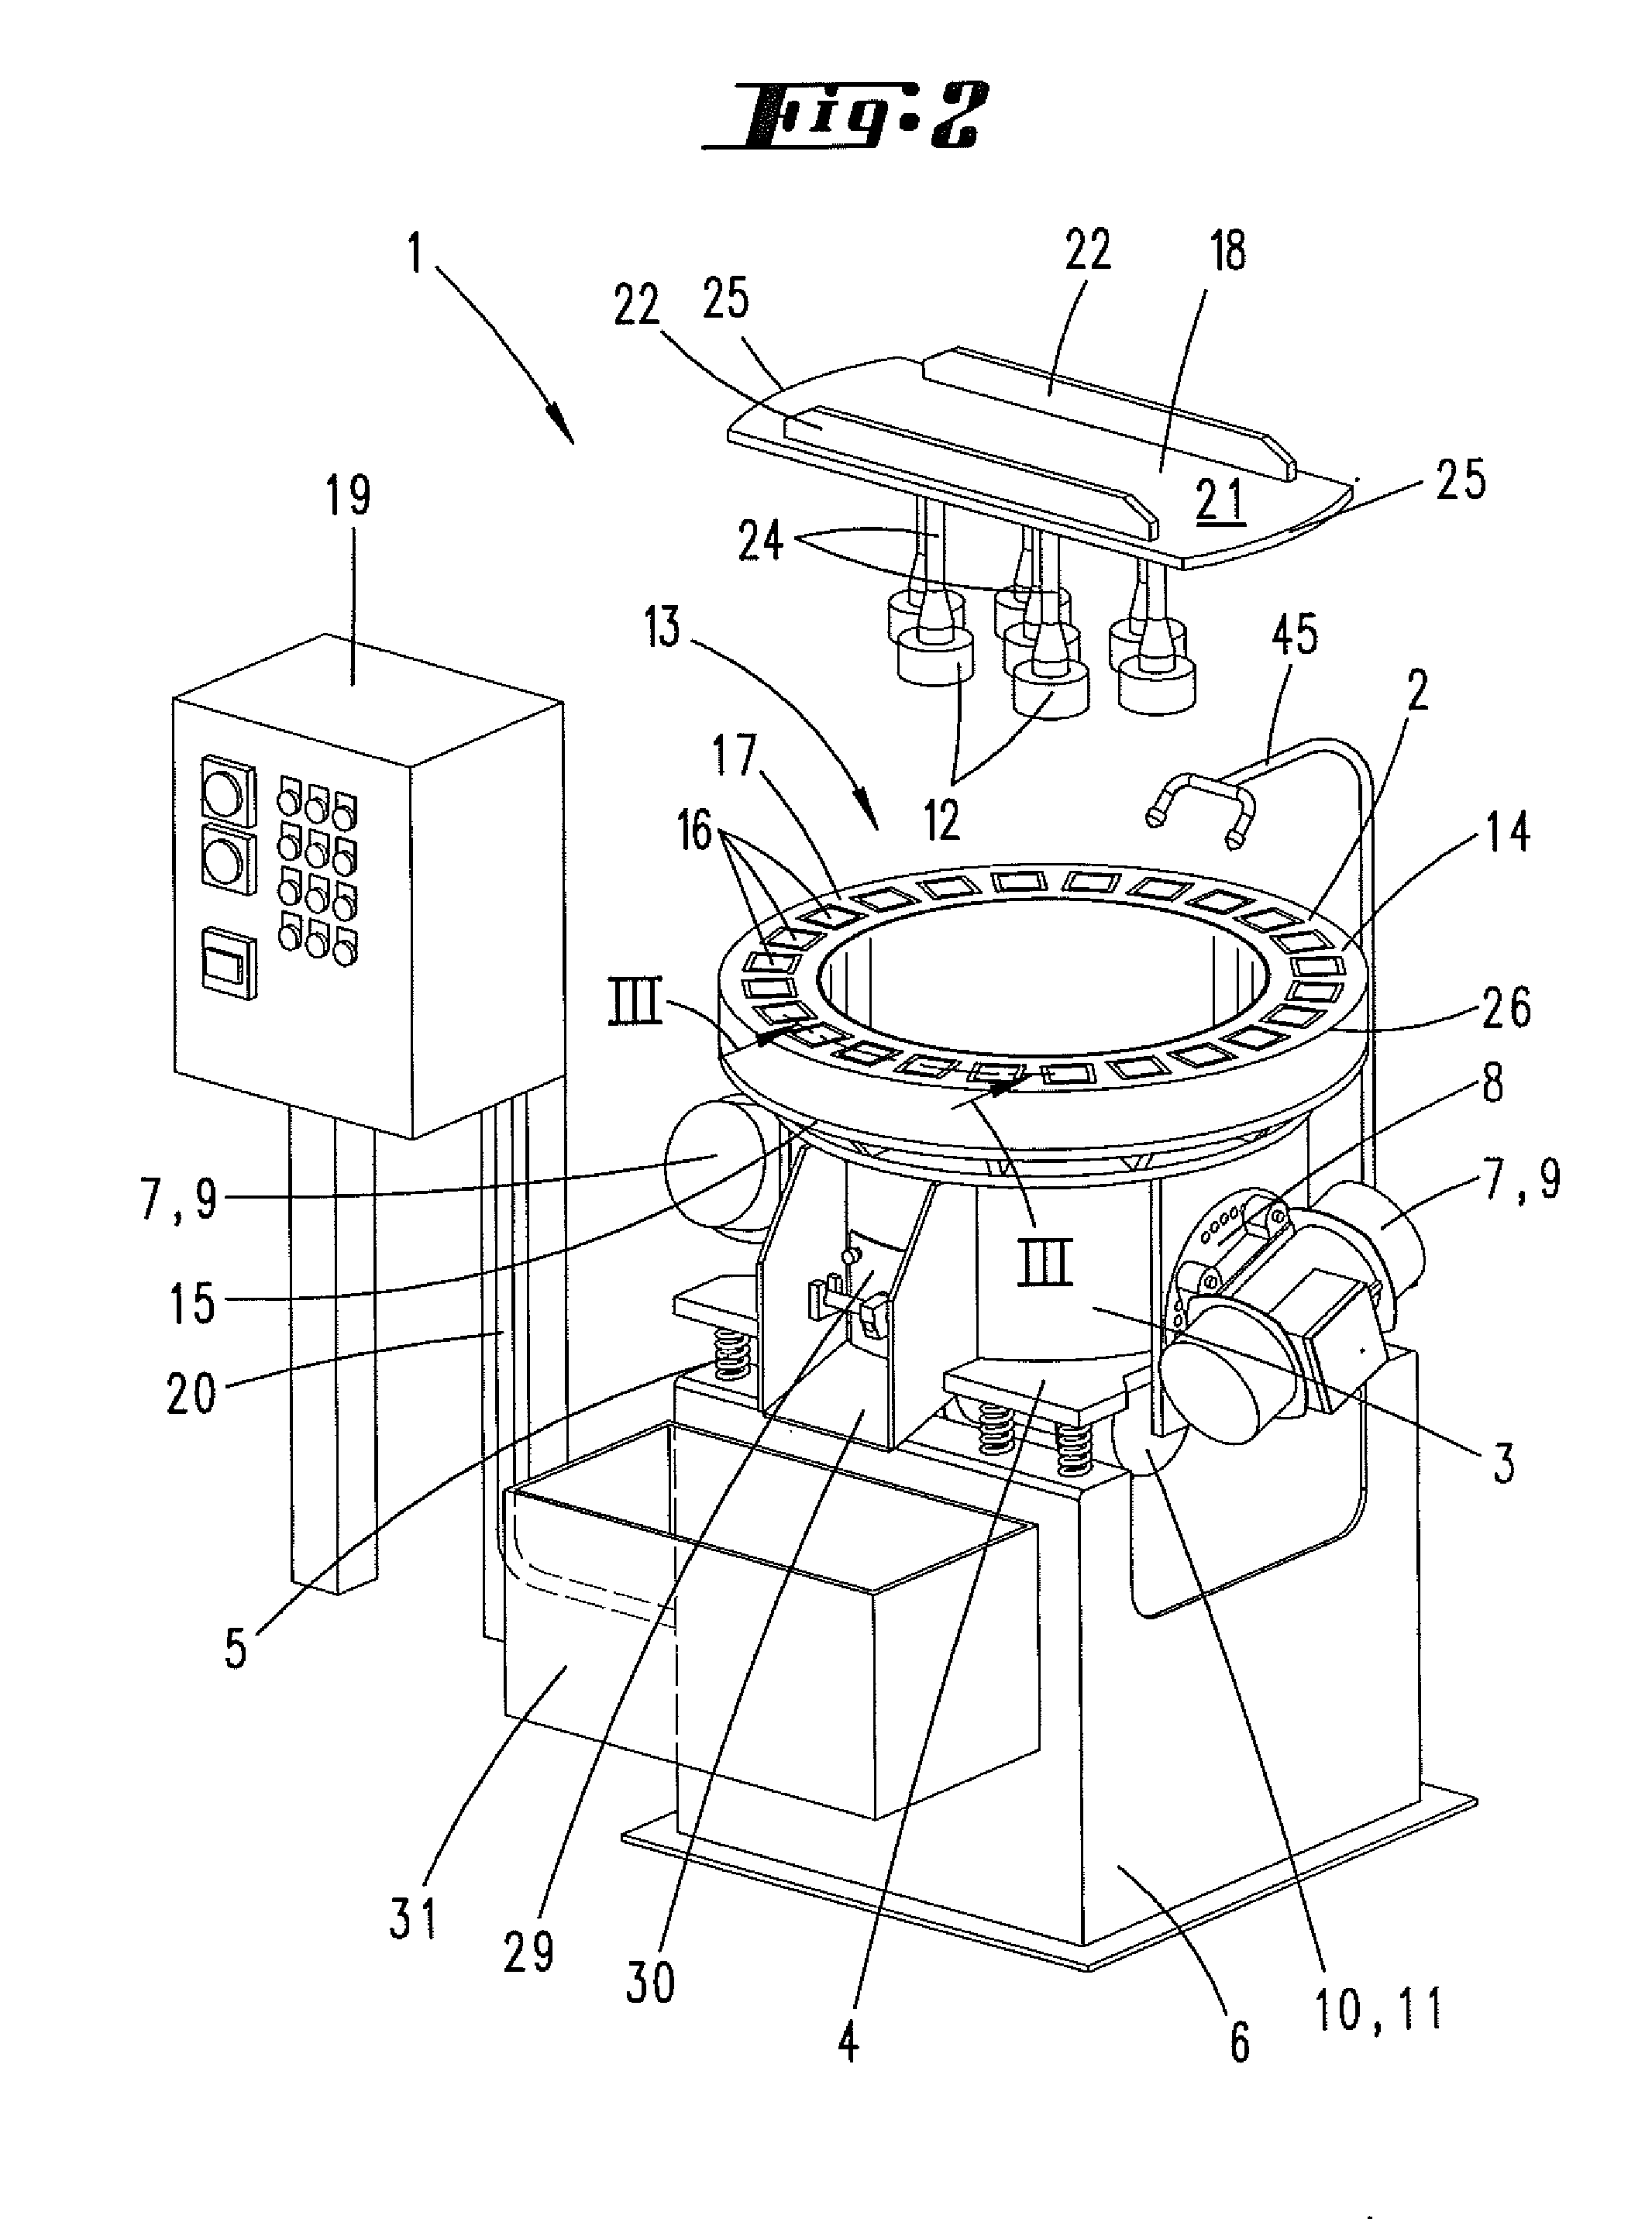 Grinding or polishing apparatus and method for operating it